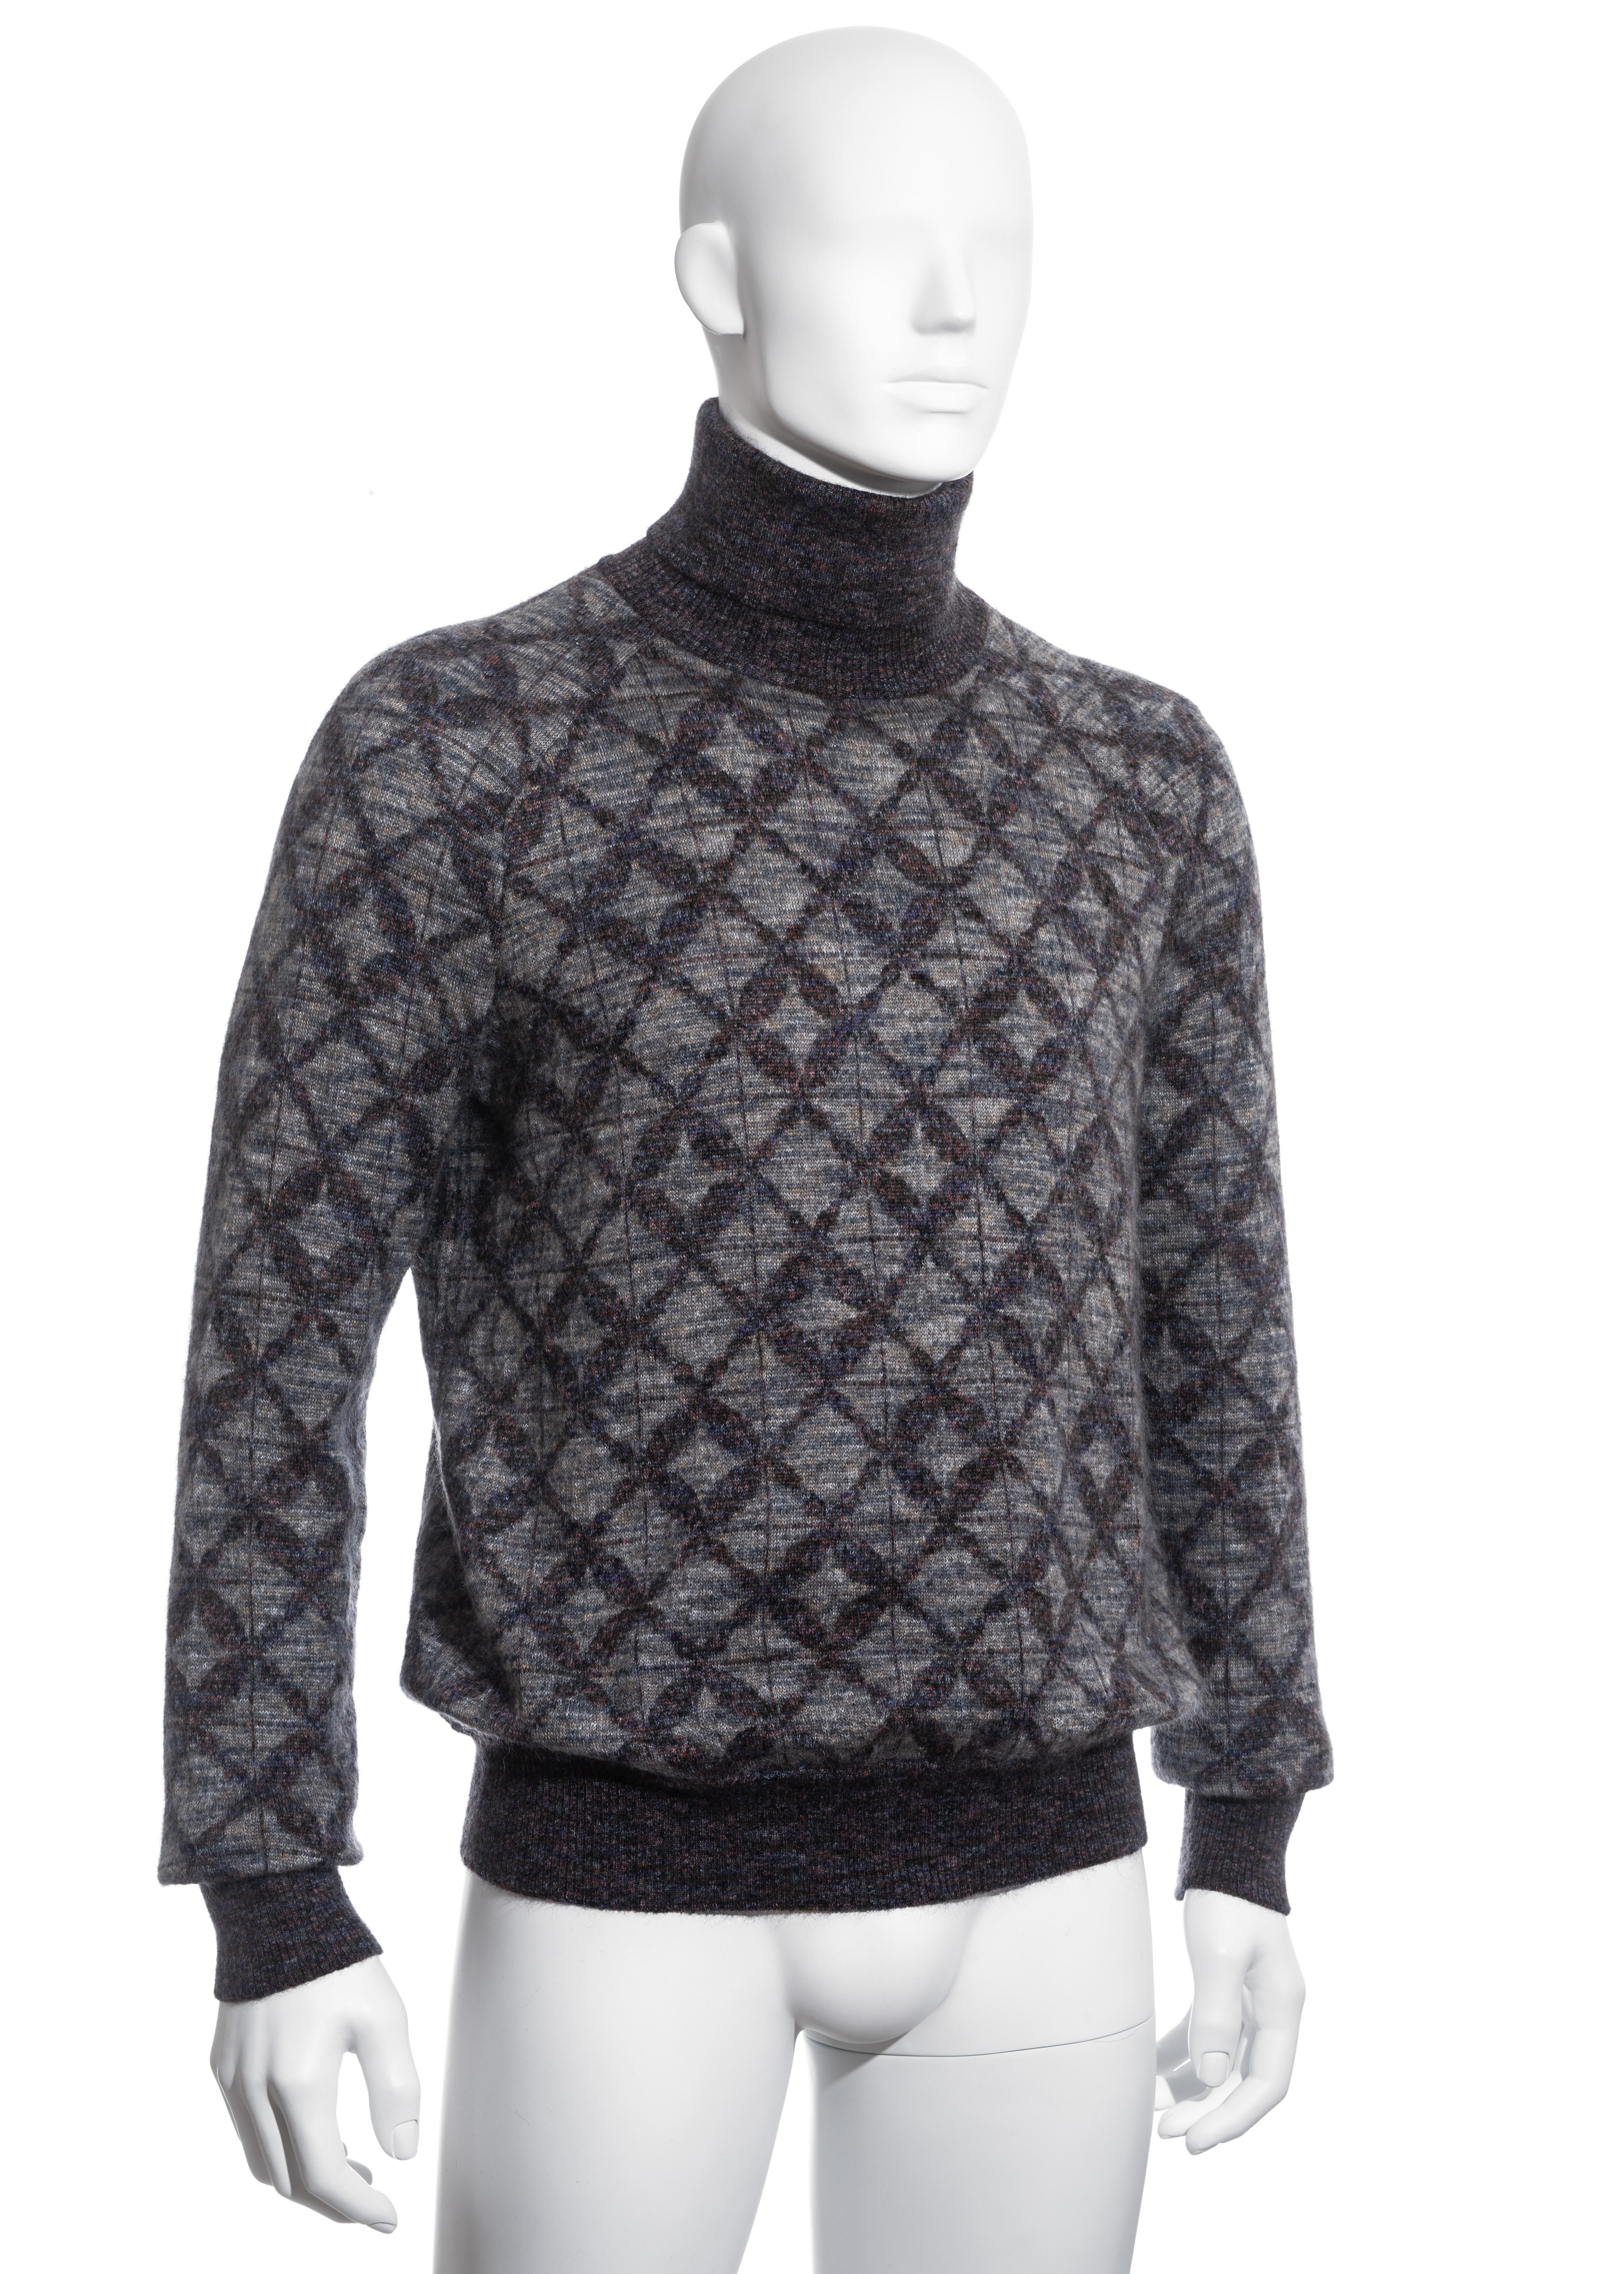 ▪ Men's Chanel knitted turtle neck sweater
▪ Designed by Karl Lagerfeld
▪ 70% Mohair, 30% Silk
▪ Diamond quilt pattern
▪ Size 50 
▪ Pre-Fall 2016